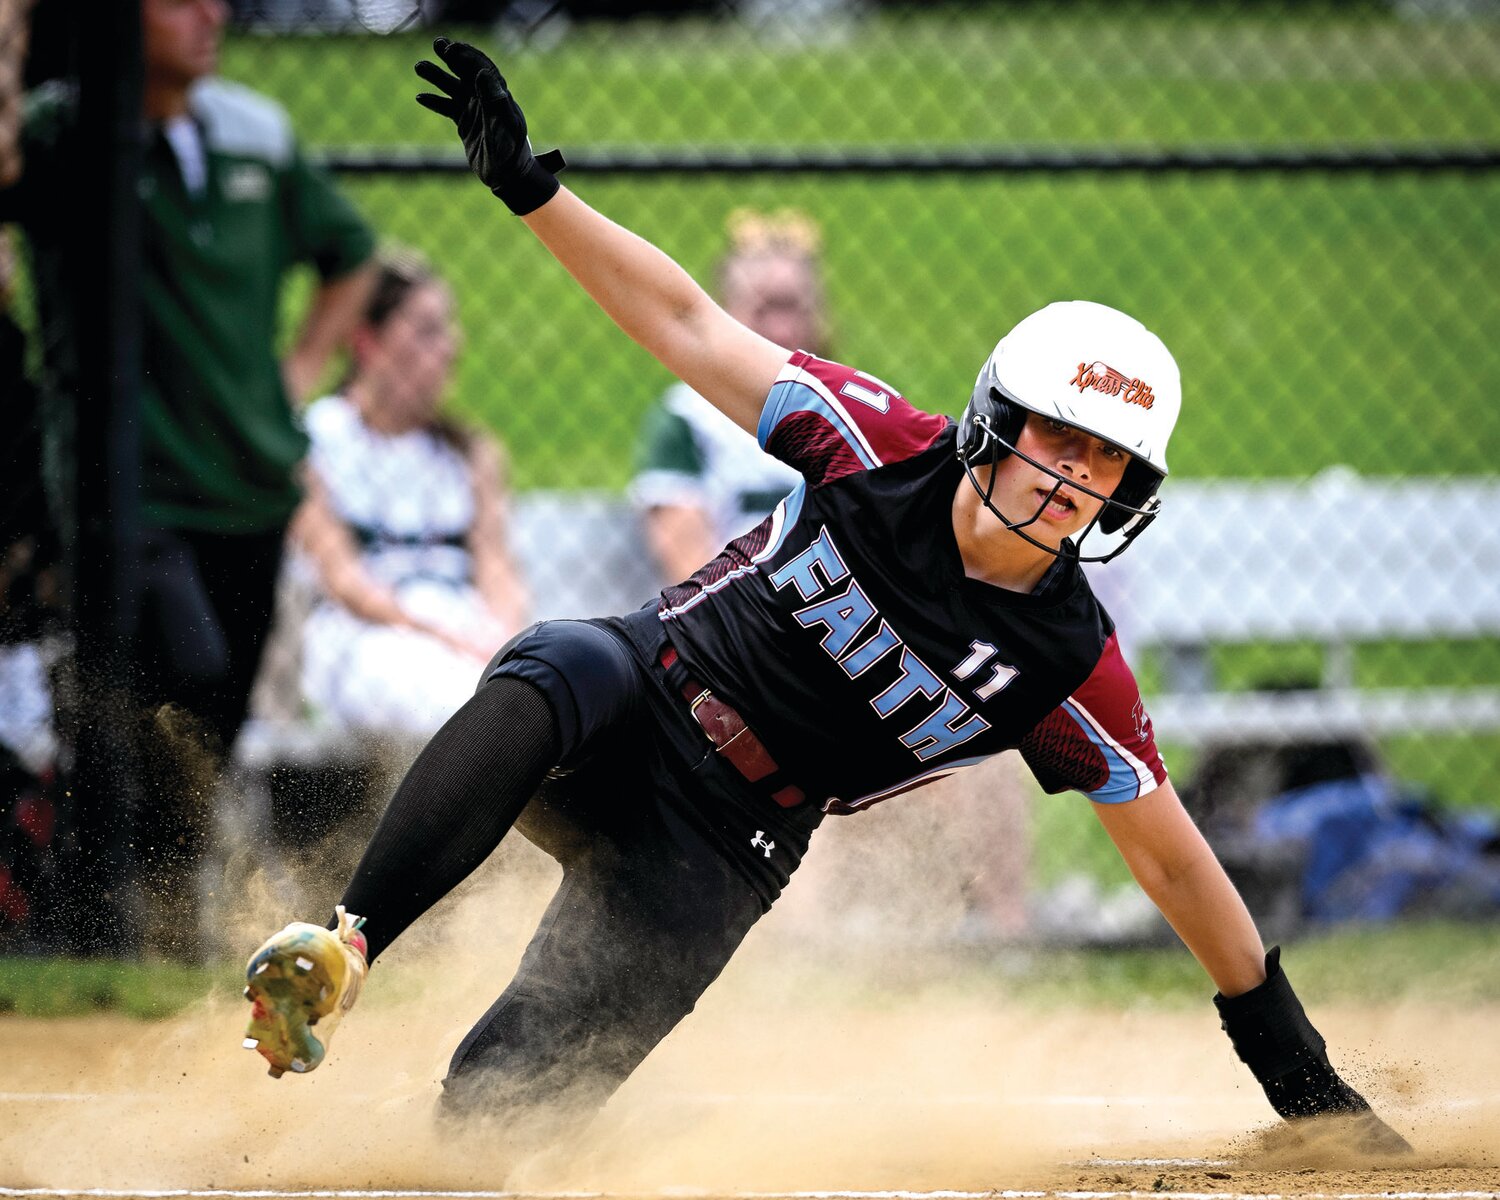 Faith Christian’s Lexi Reed slides safely after scoring the game’s first run.